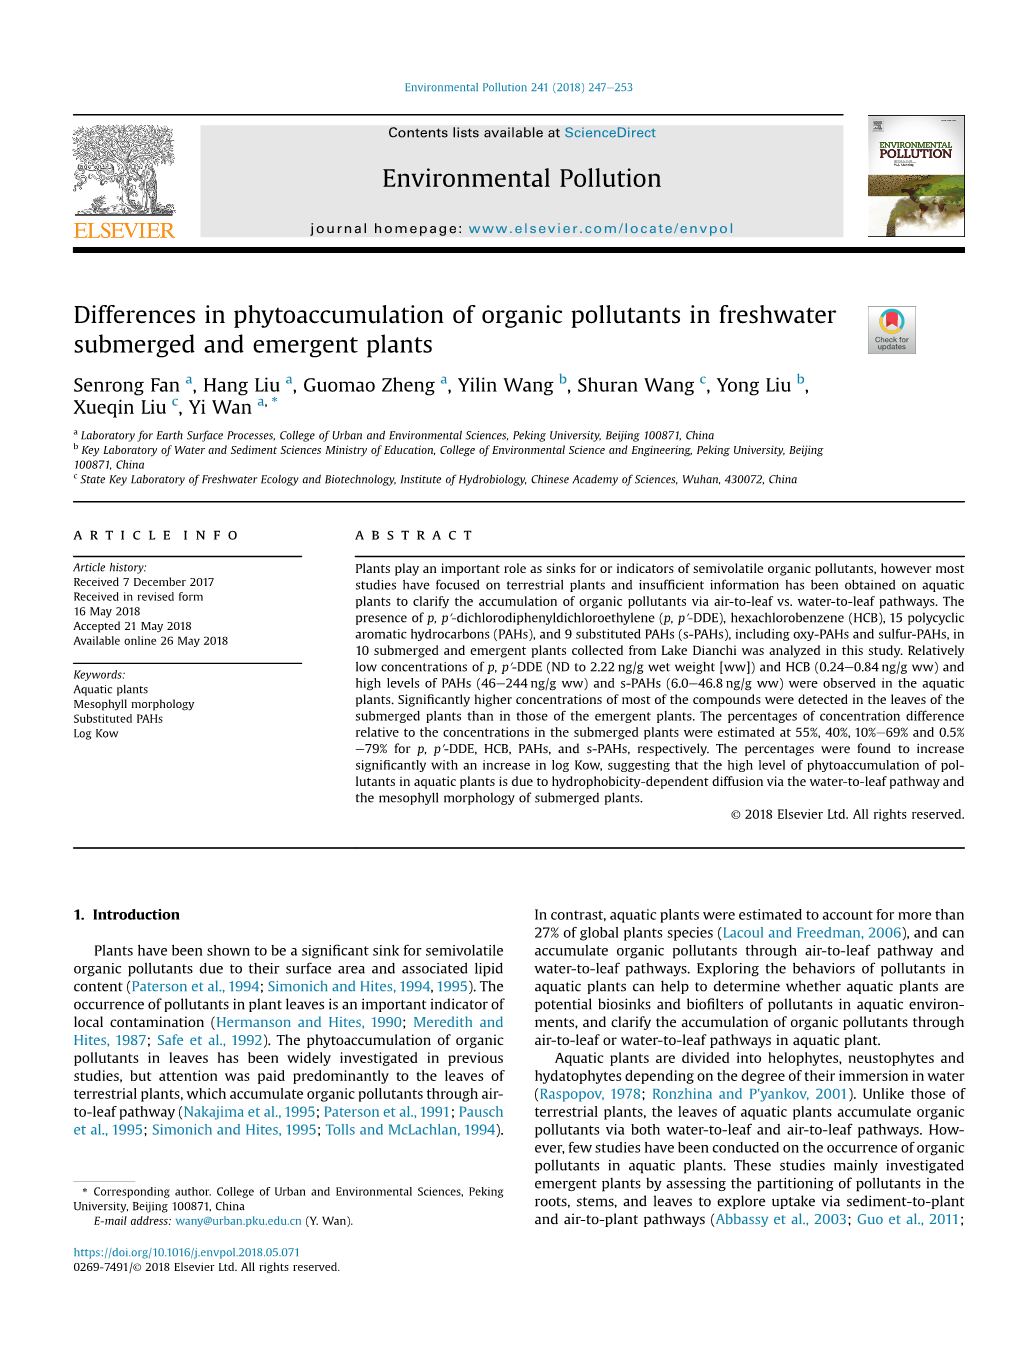 Differences in Phytoaccumulation of Organic Pollutants in Freshwater Submerged and Emergent Plants